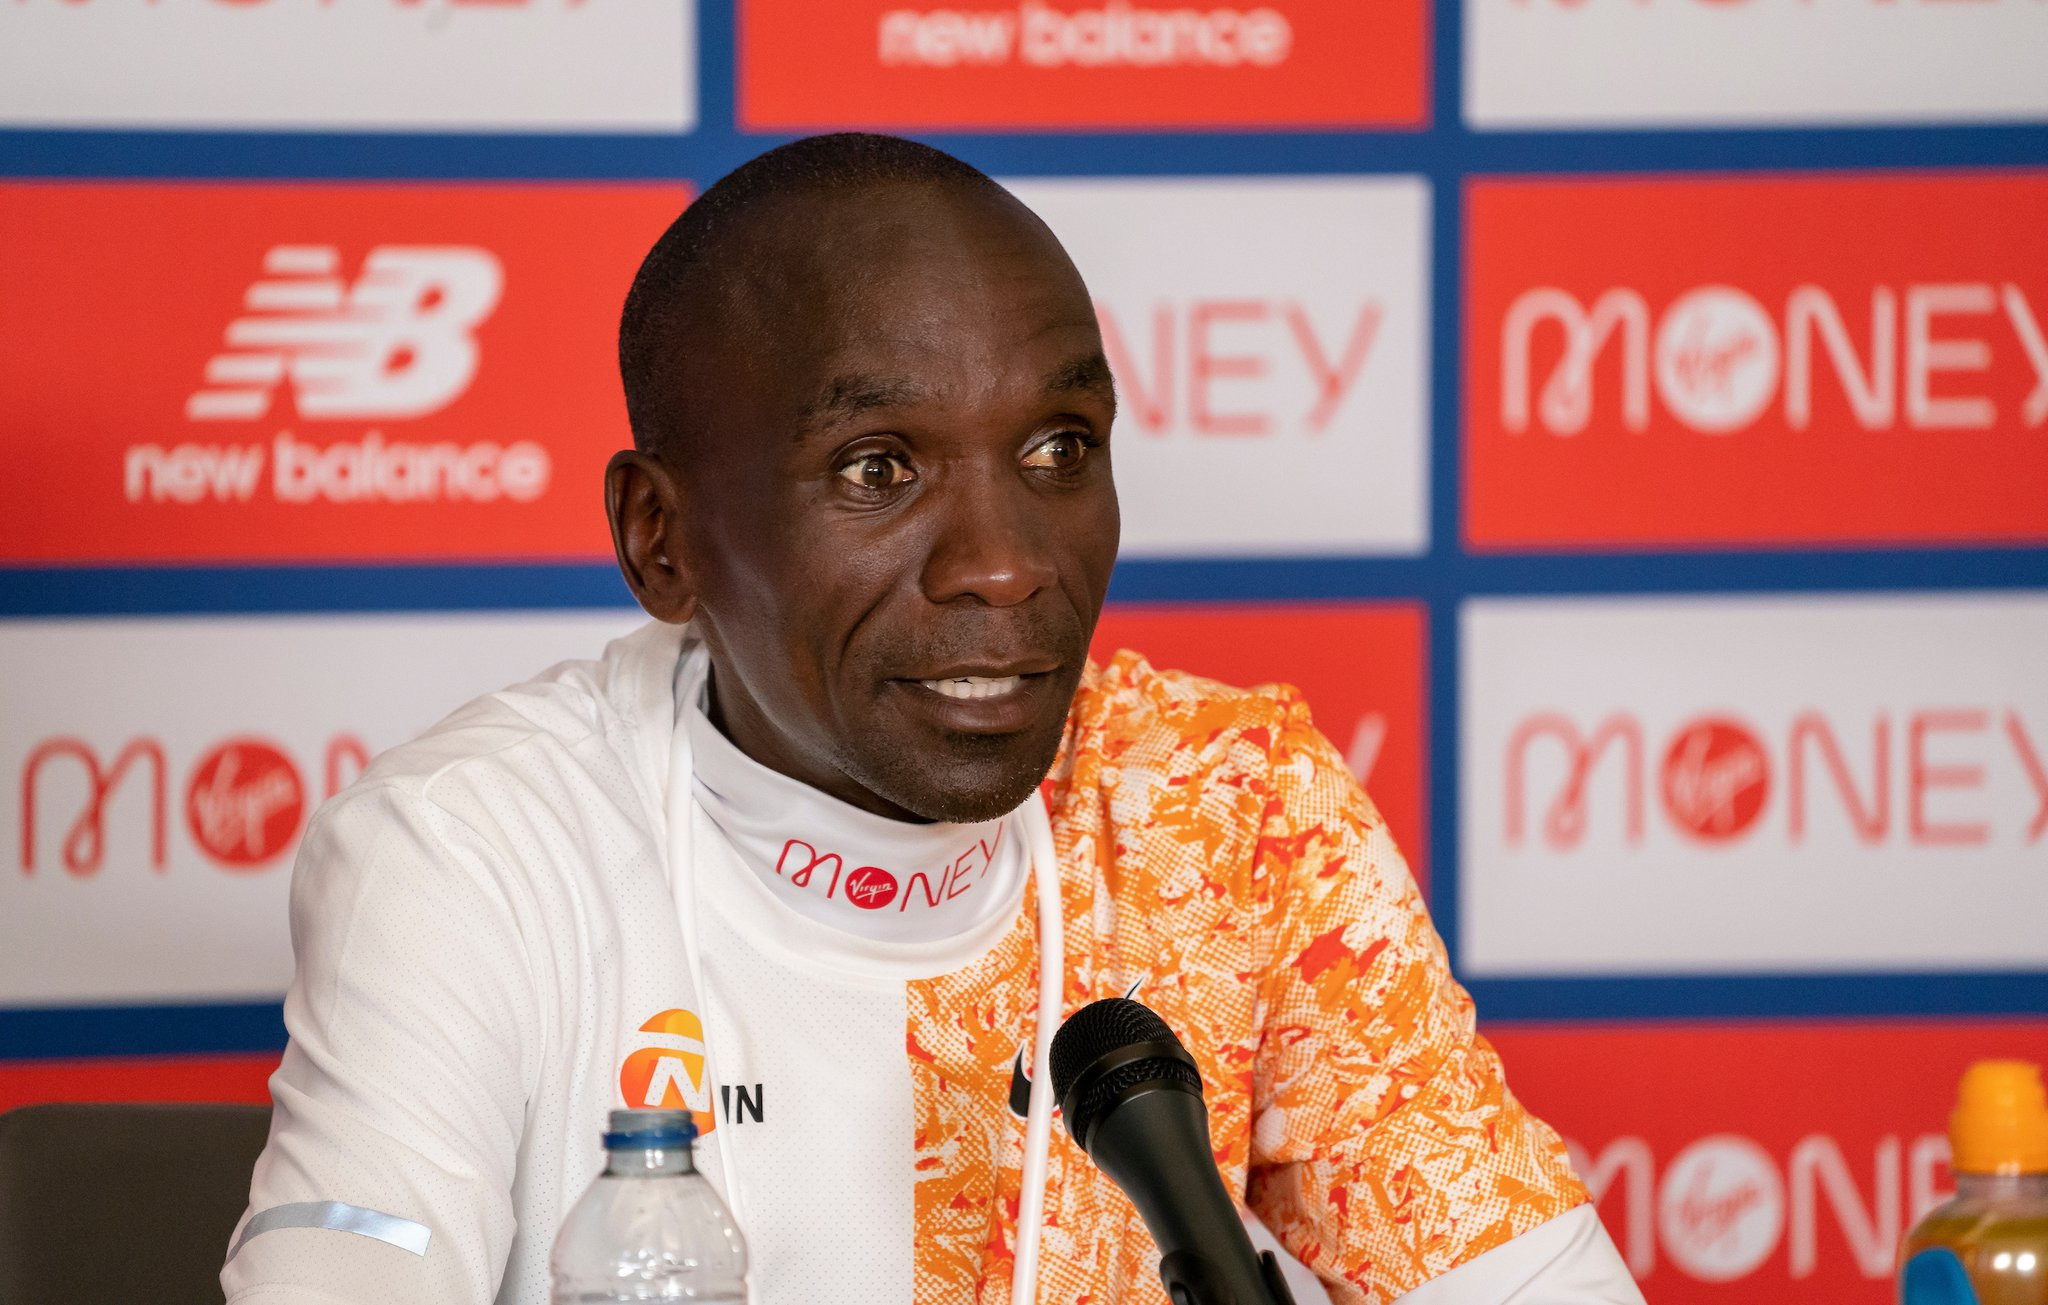 Kipchoge and Kosgei out to defend titles at London Marathon